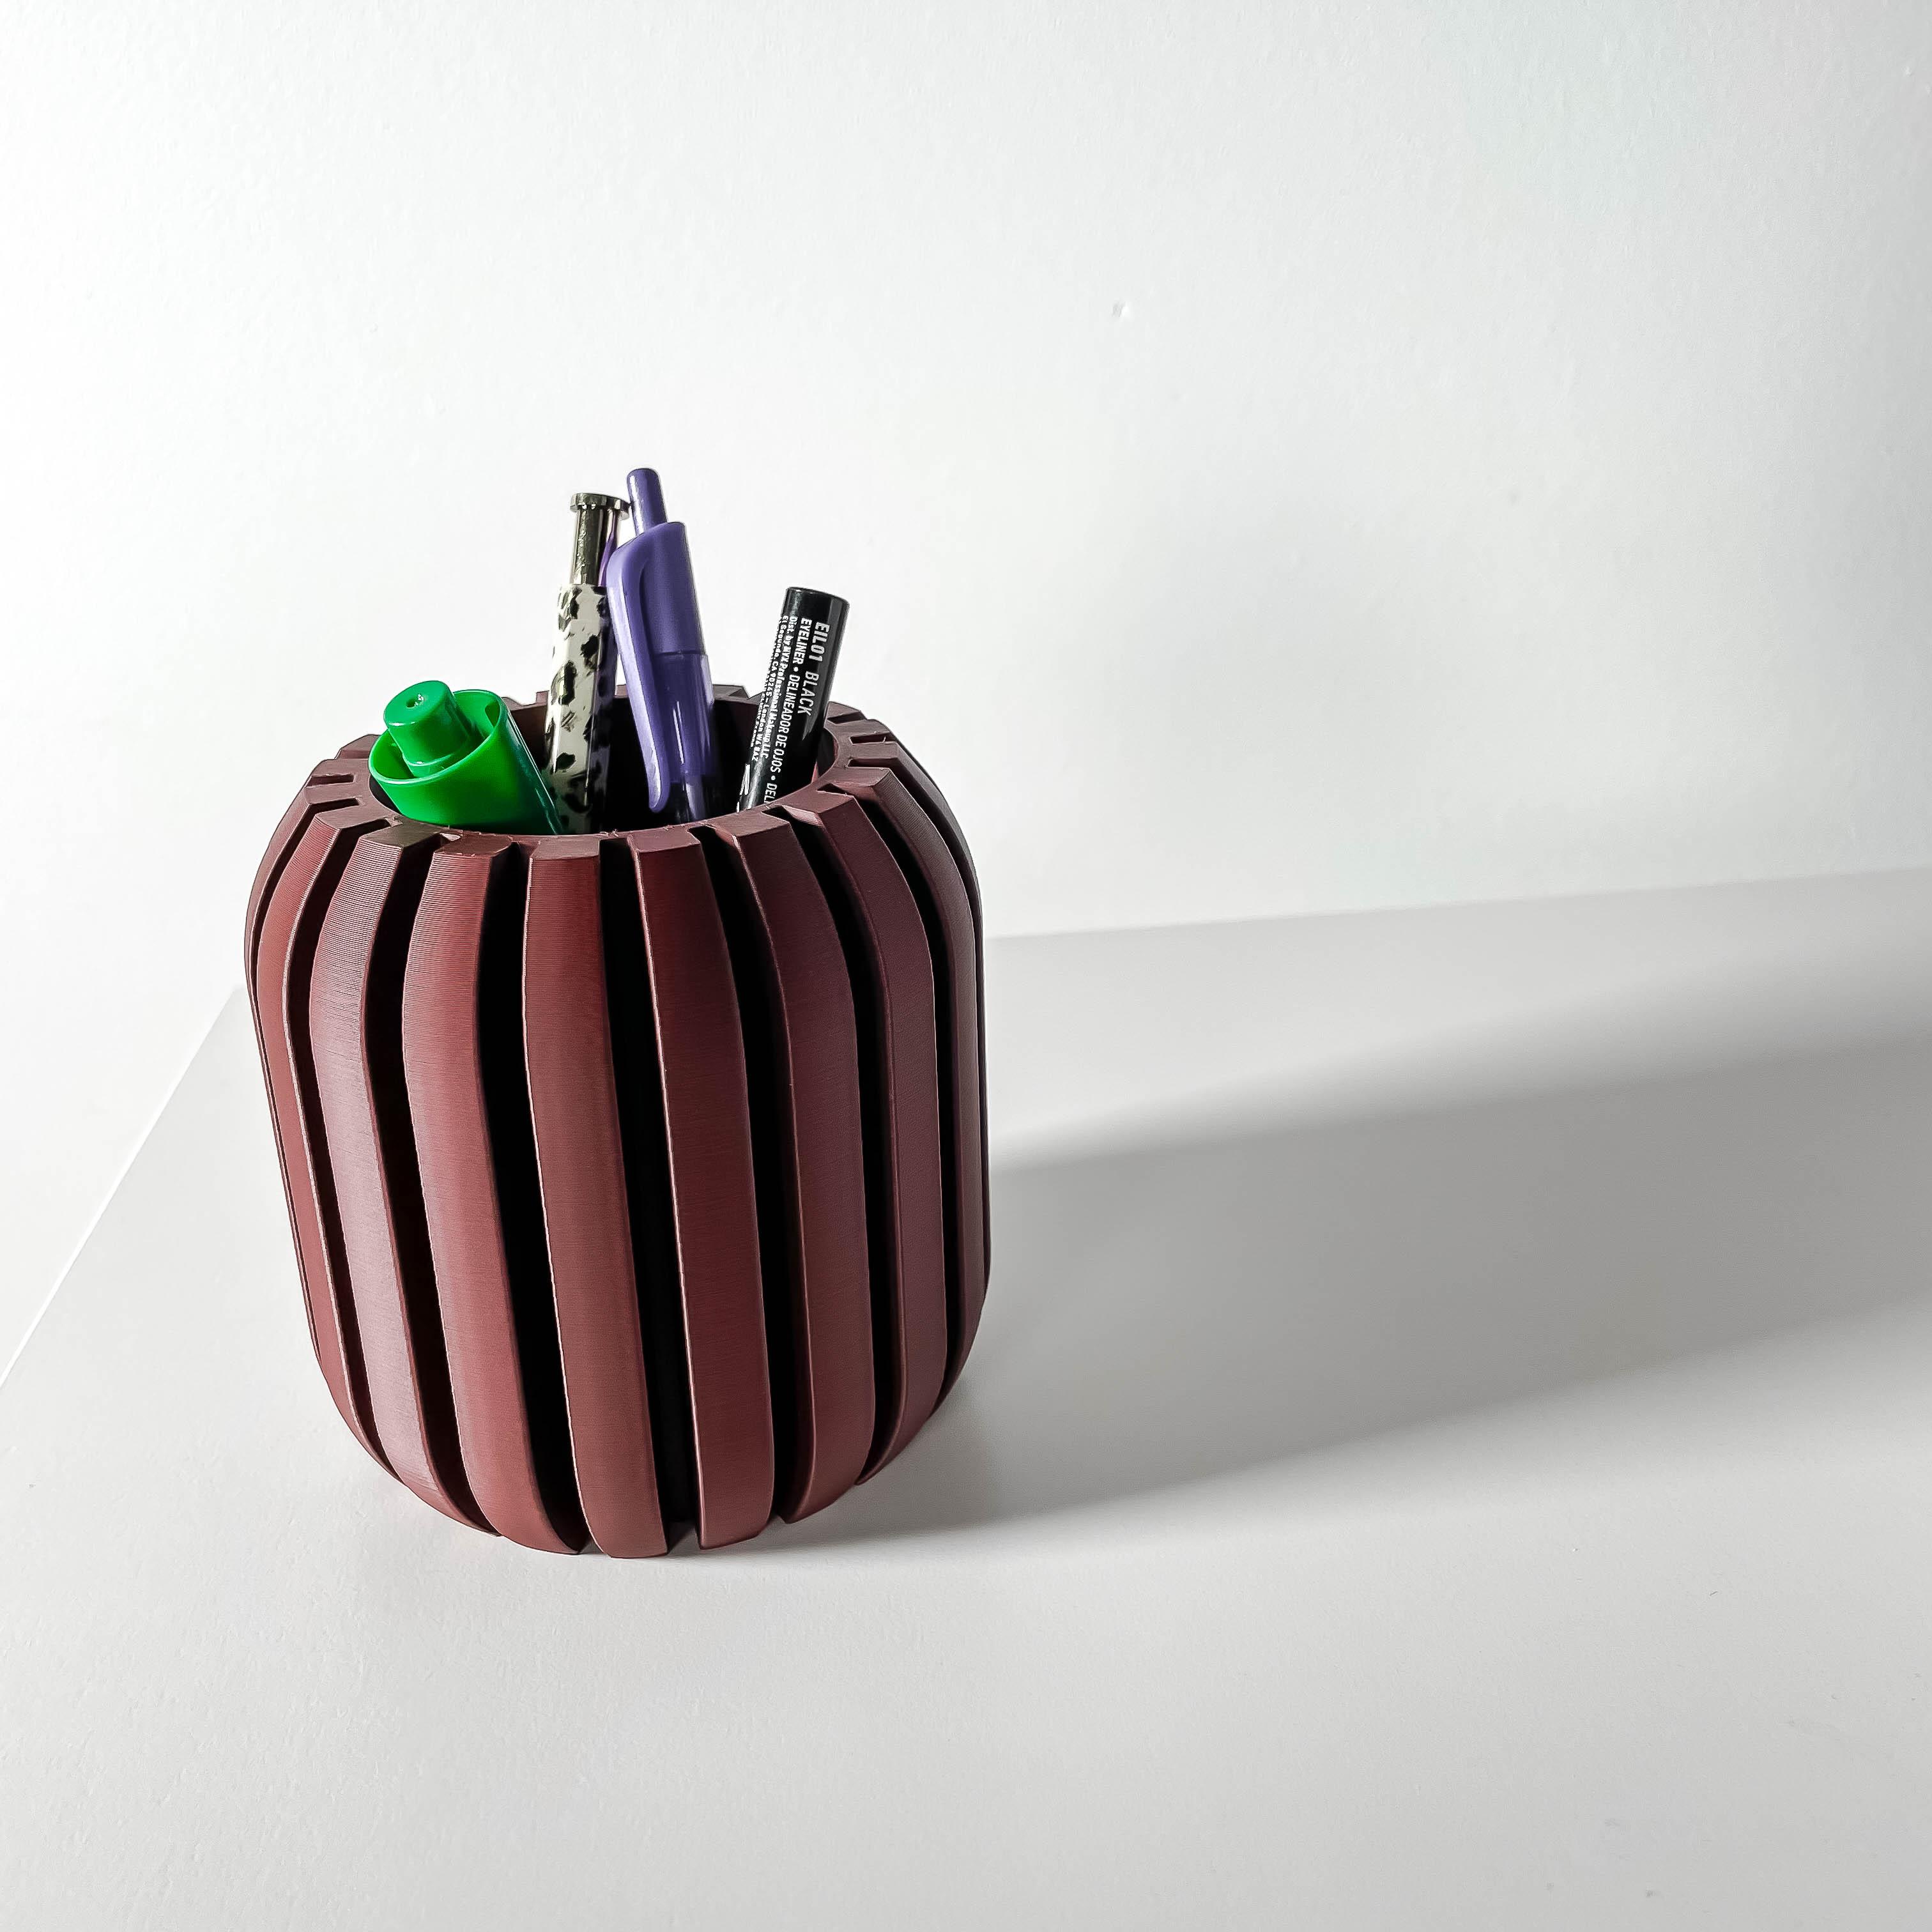 The Unra Pen Holder, Desk Organizer and Pencil Cup Holder